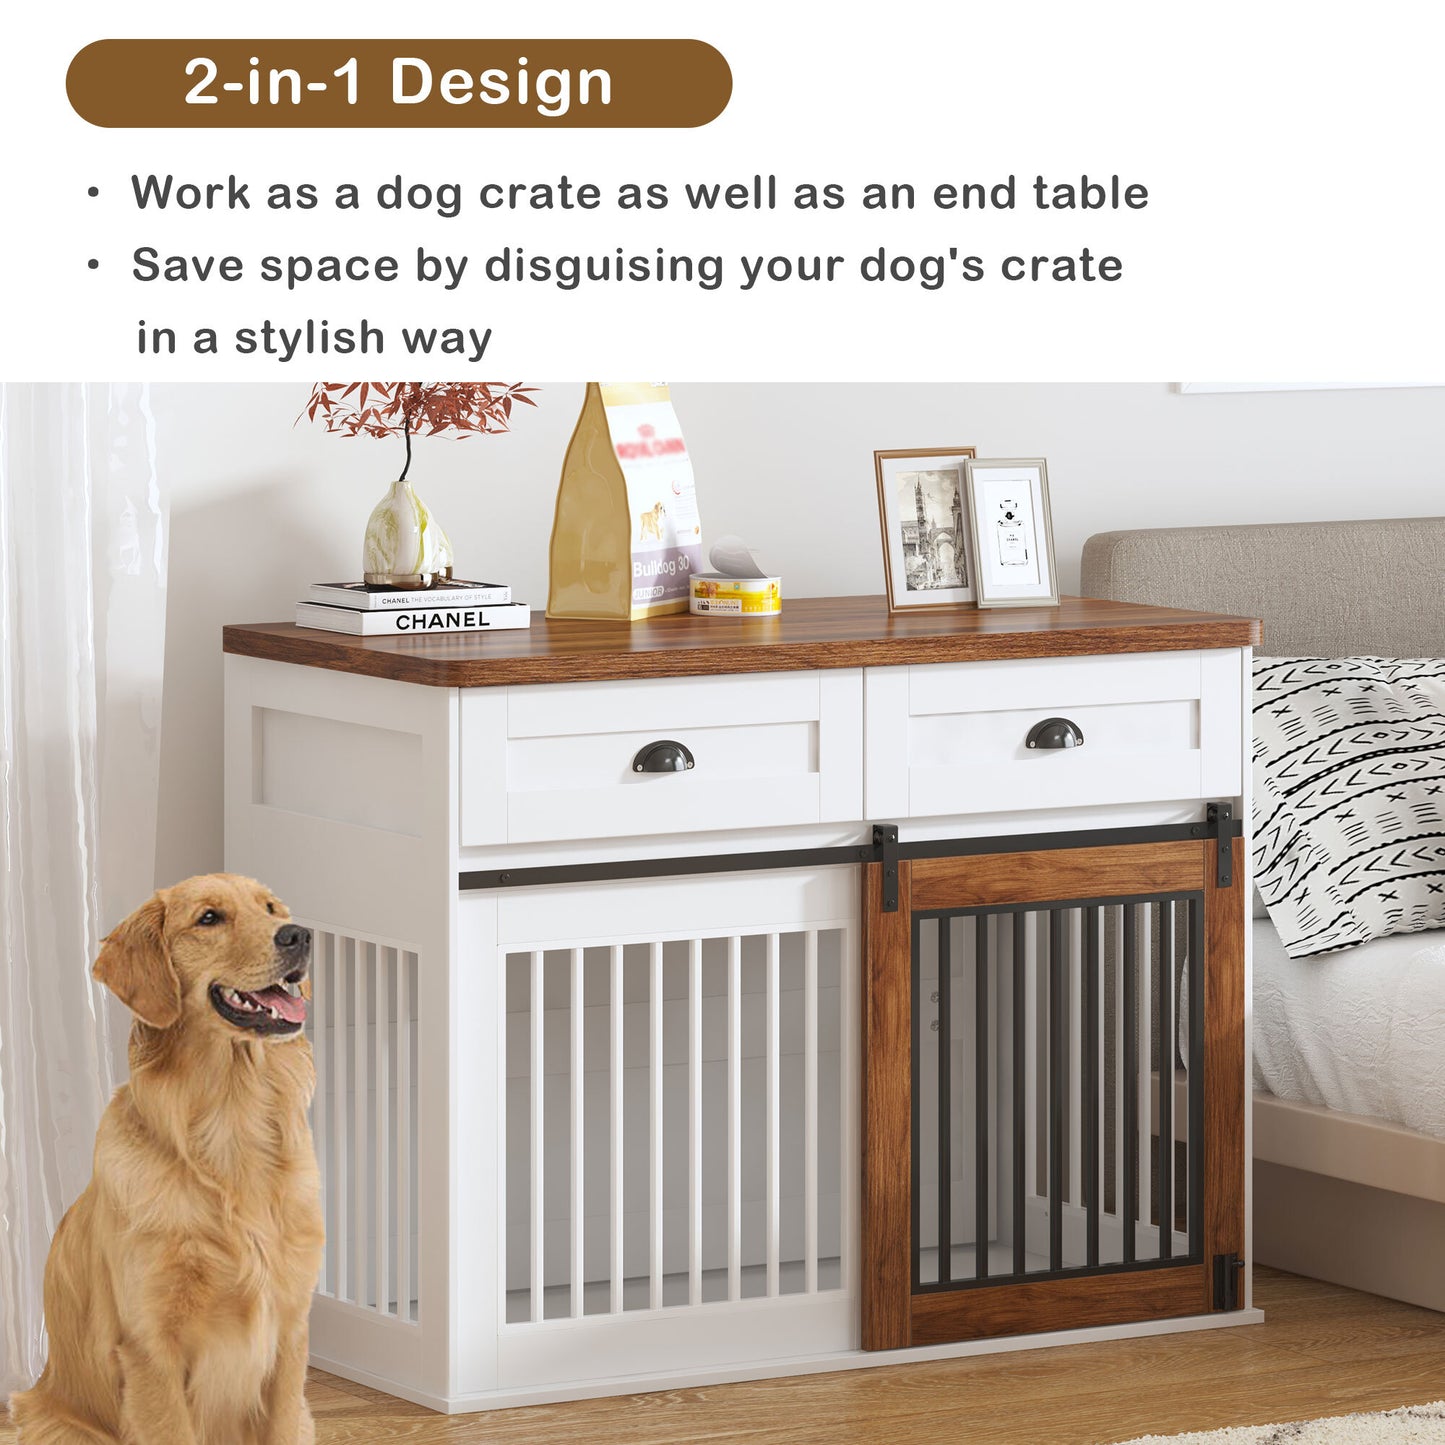 SogesPower 44 in Dog Crate Furniture with Sliding Barn Door, Wooden Dog Kennel with 2 Drawers and Lock, Indoor Dog House for Small/Medium/Large Dogs